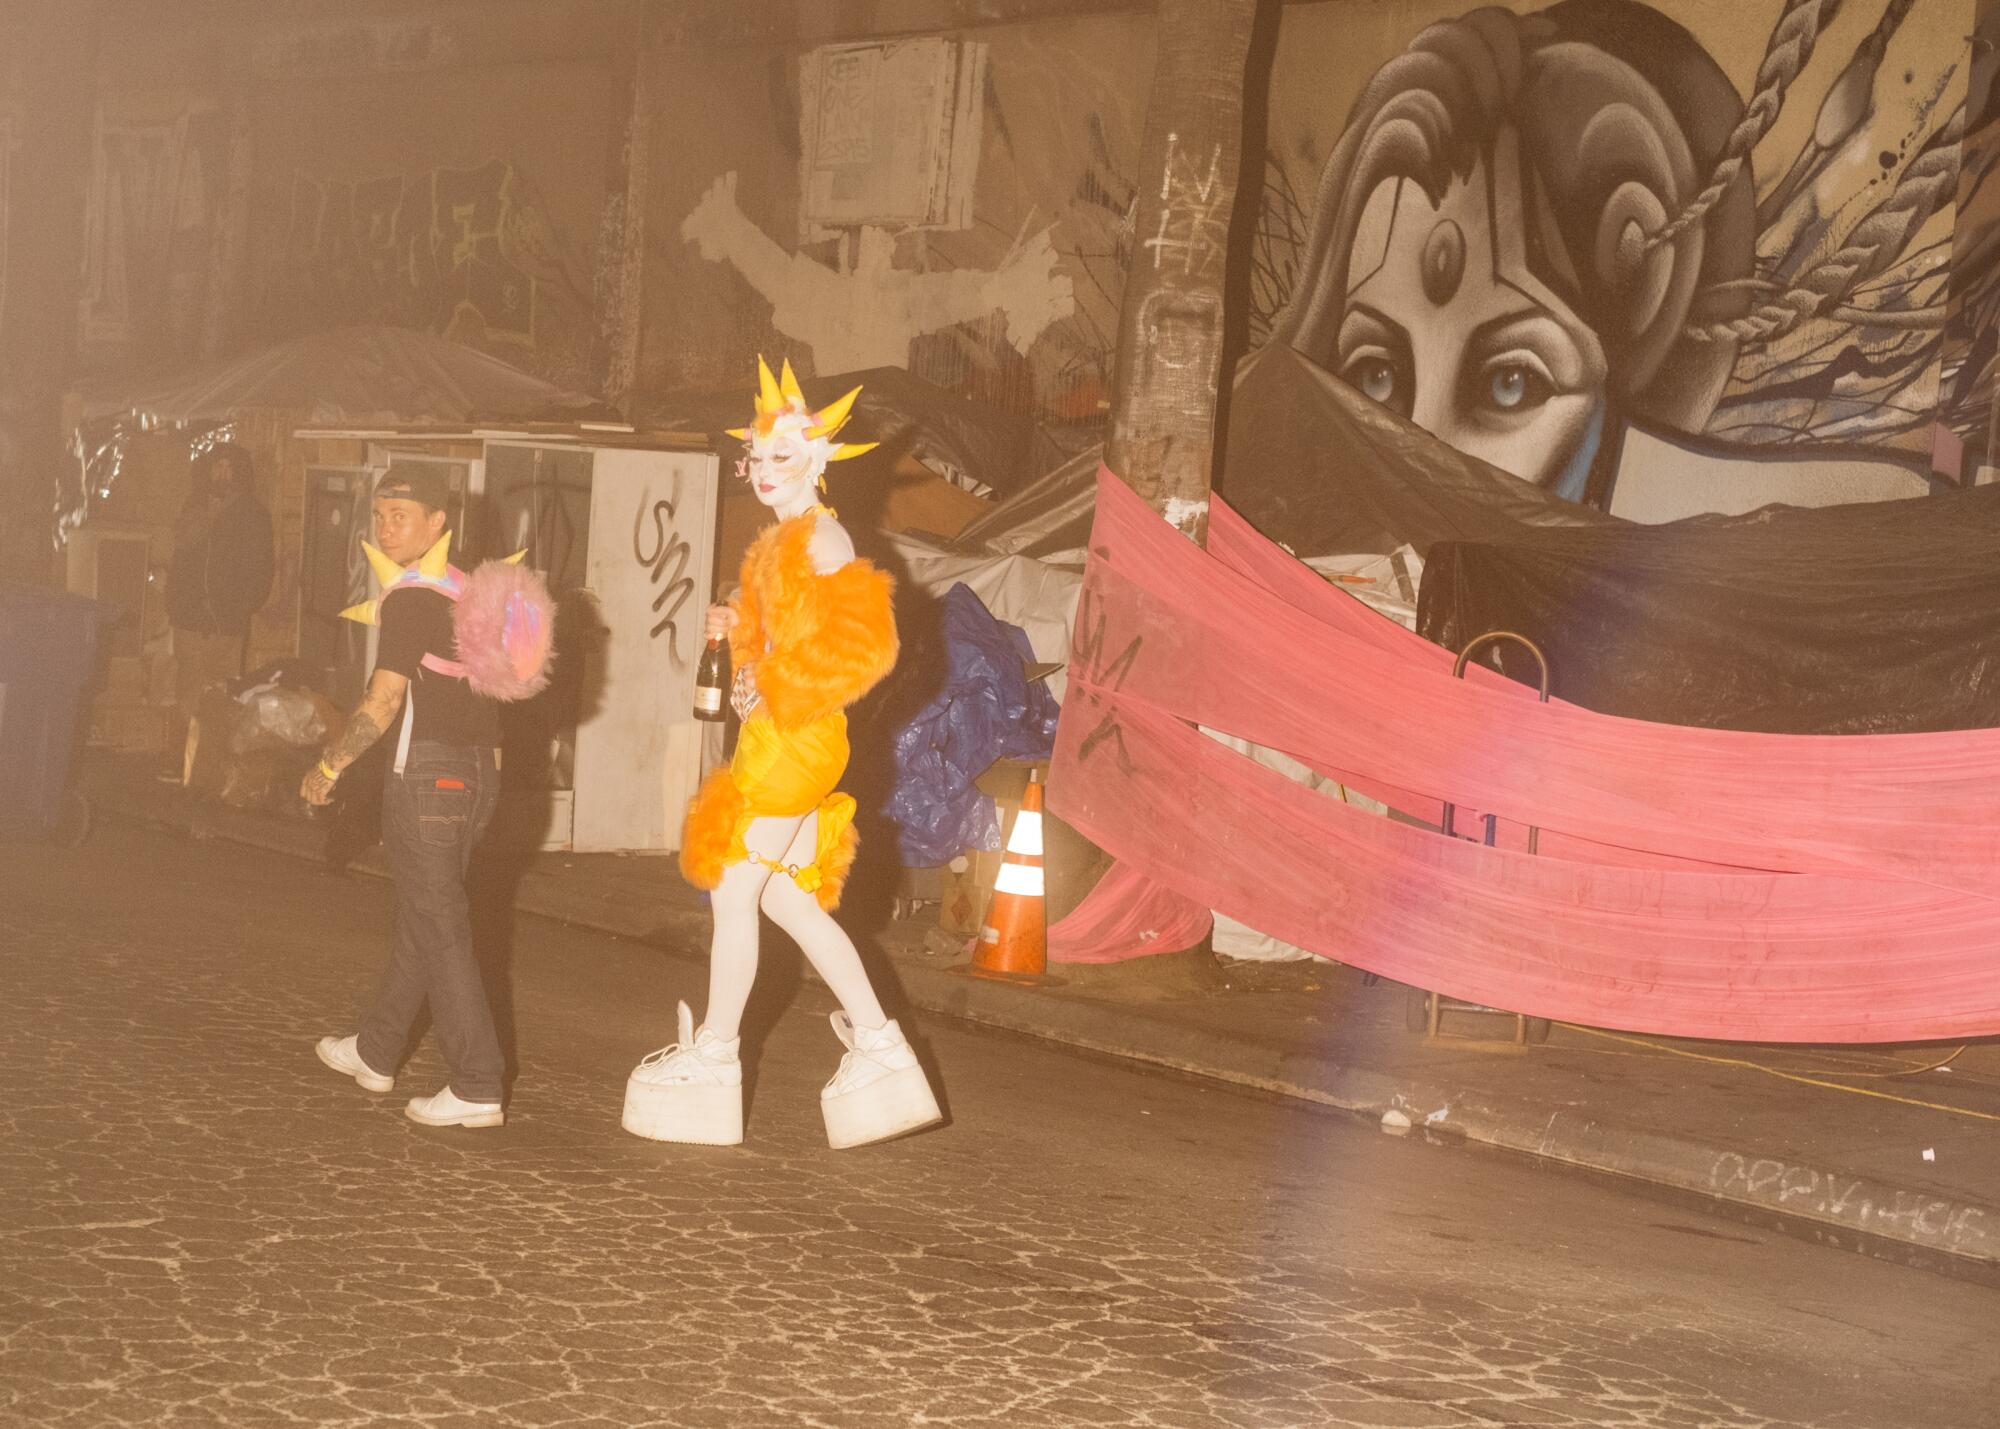 People in extravagant outfits walk outside a muraled warehouse on a street at night in LA.